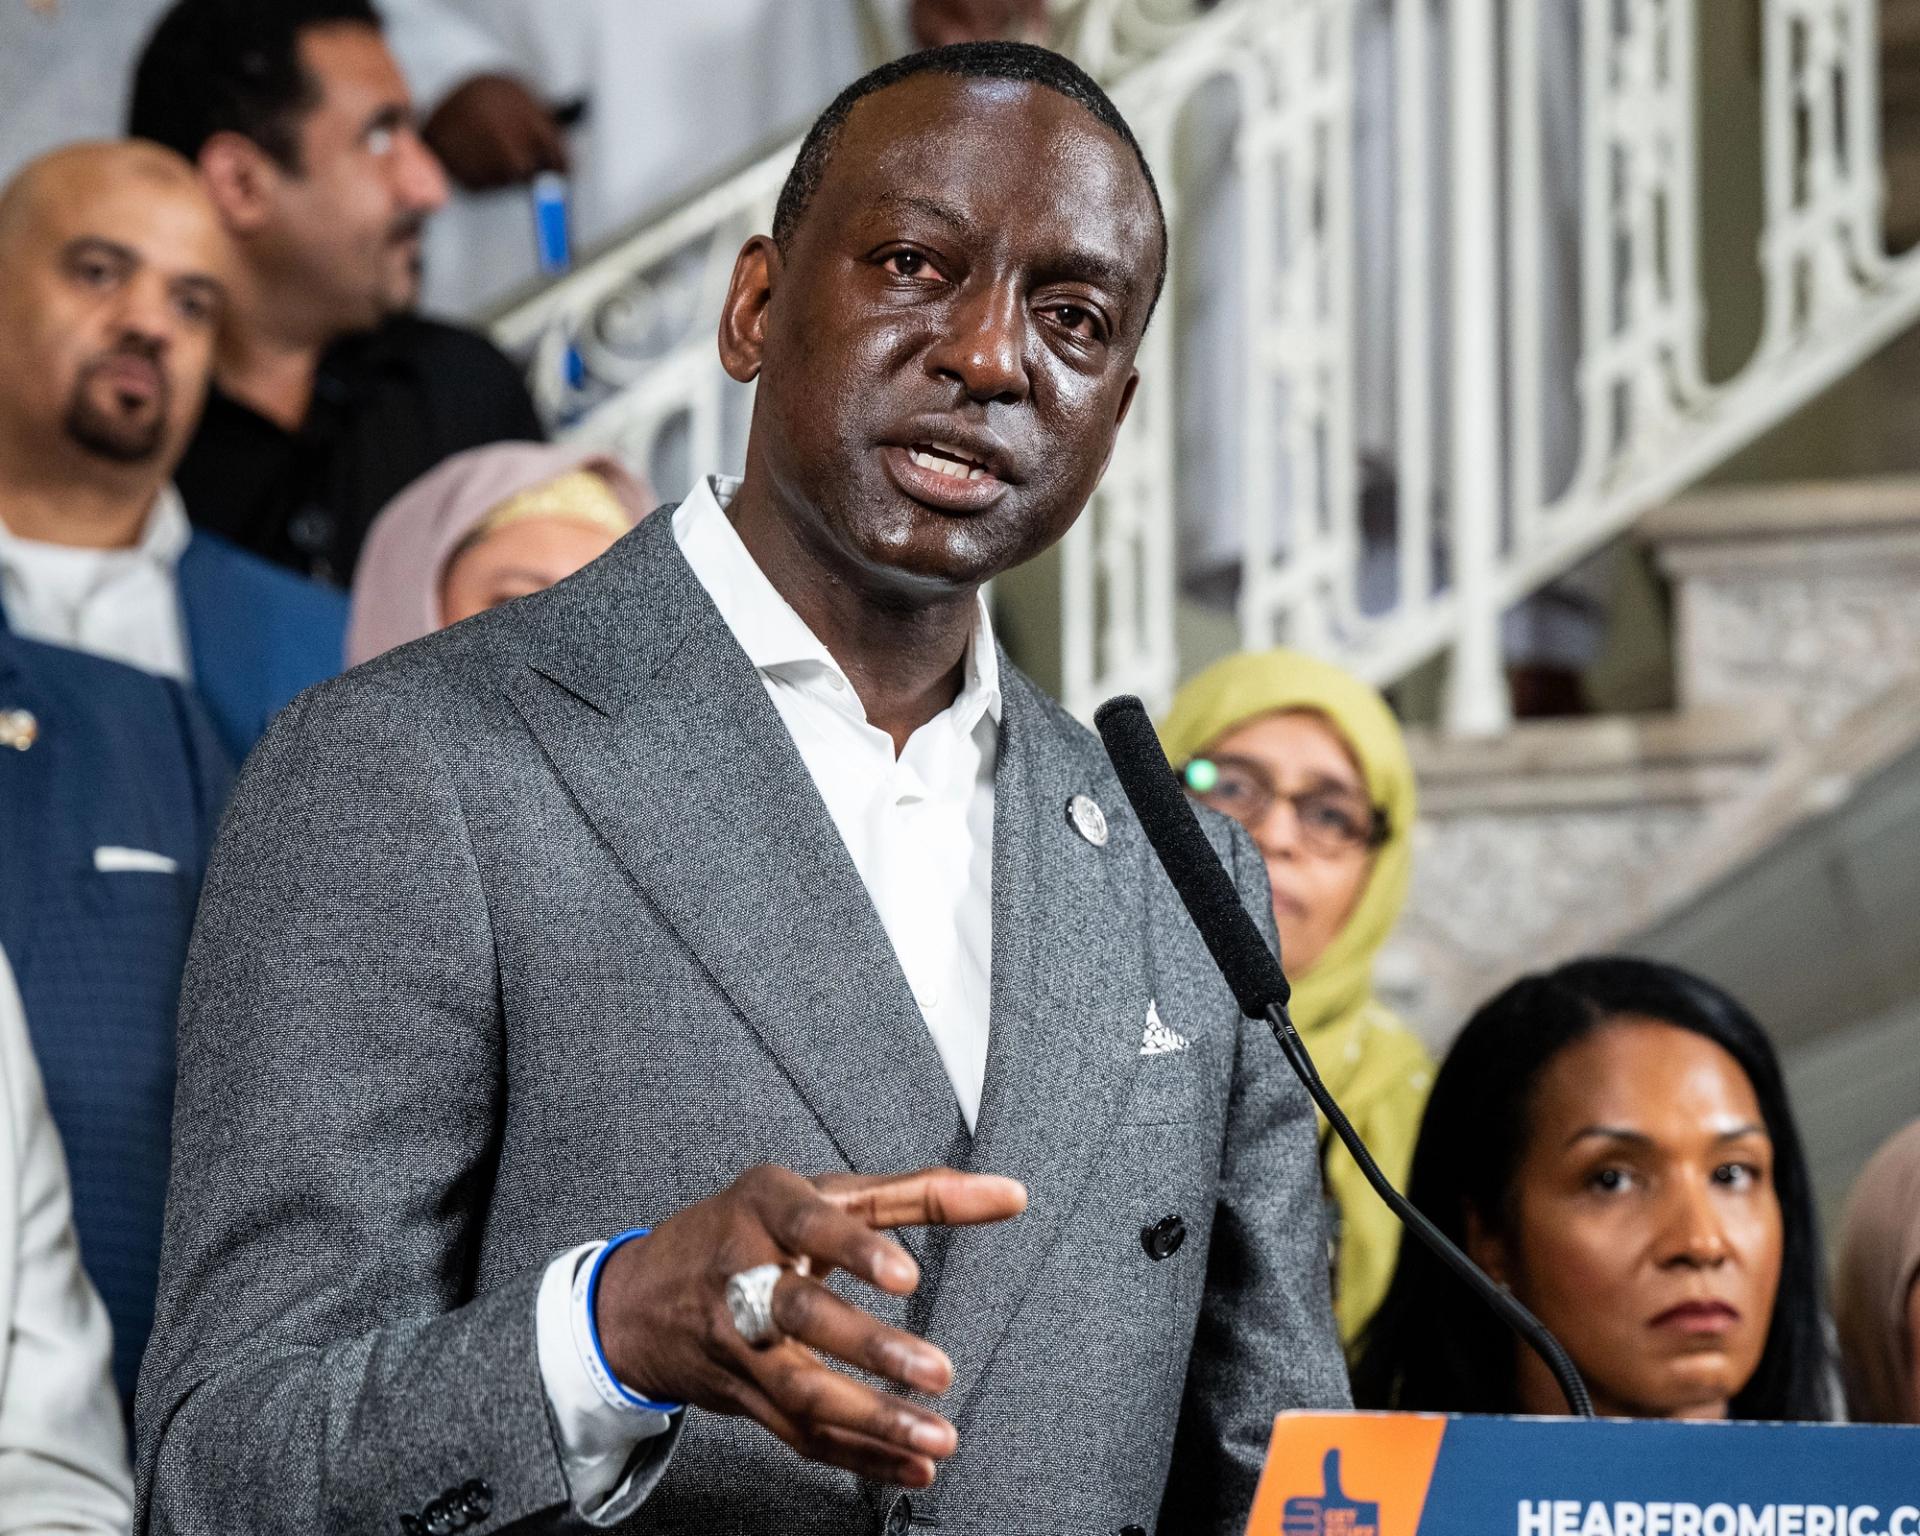 Yusef Salaam, one of the Central Park 5, who won a seat on the New York City Council